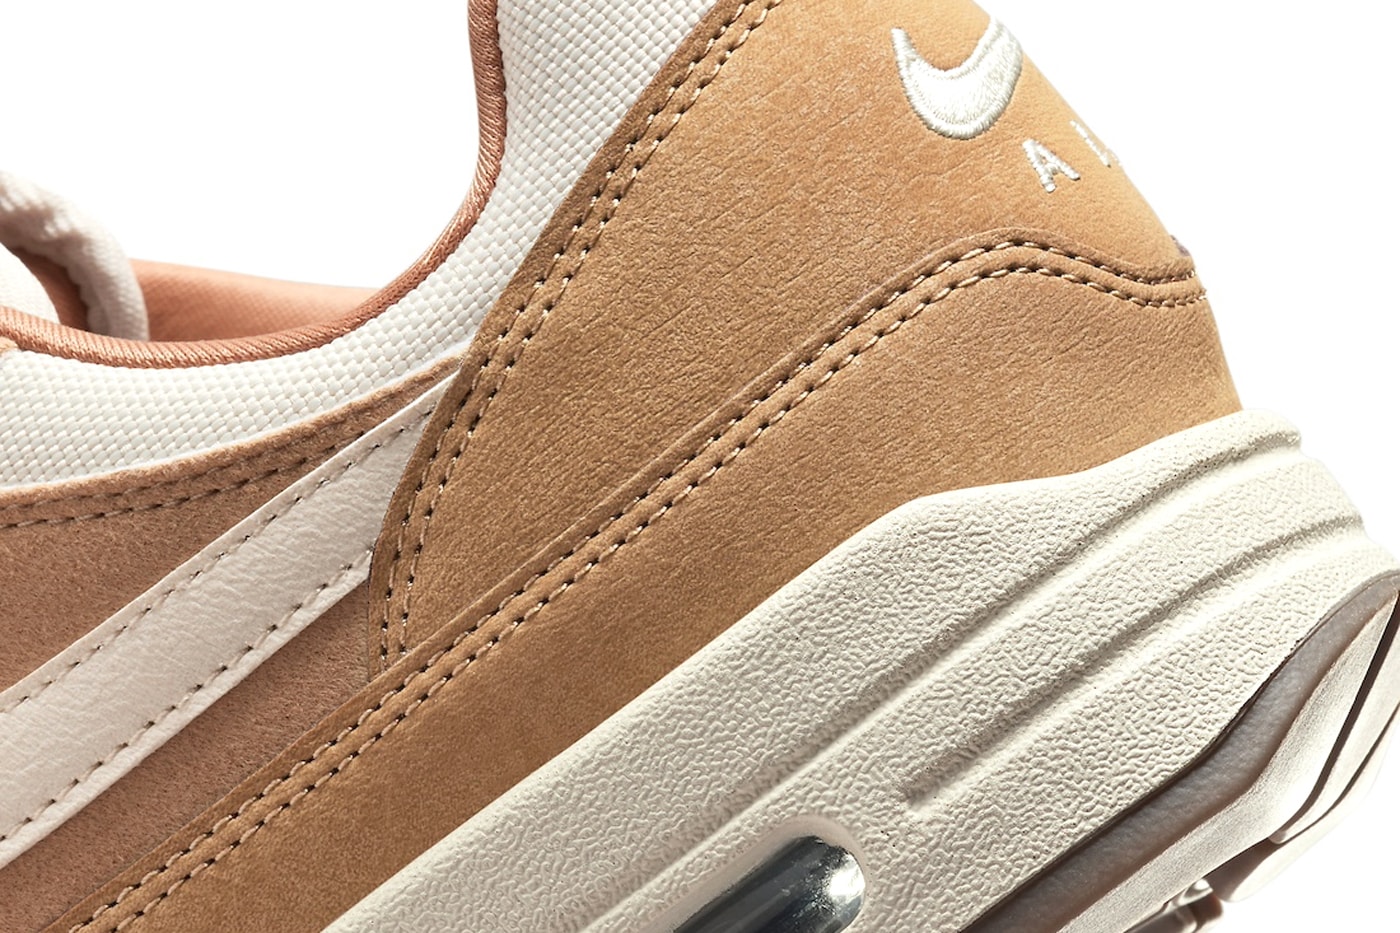 Official Look at the Nike Air Max 1 "Wheat" FZ3598-299 White/Wheat-Flax-Outdoor Green-Gum Medium Brown spring 2024 swoosh classic sneaker